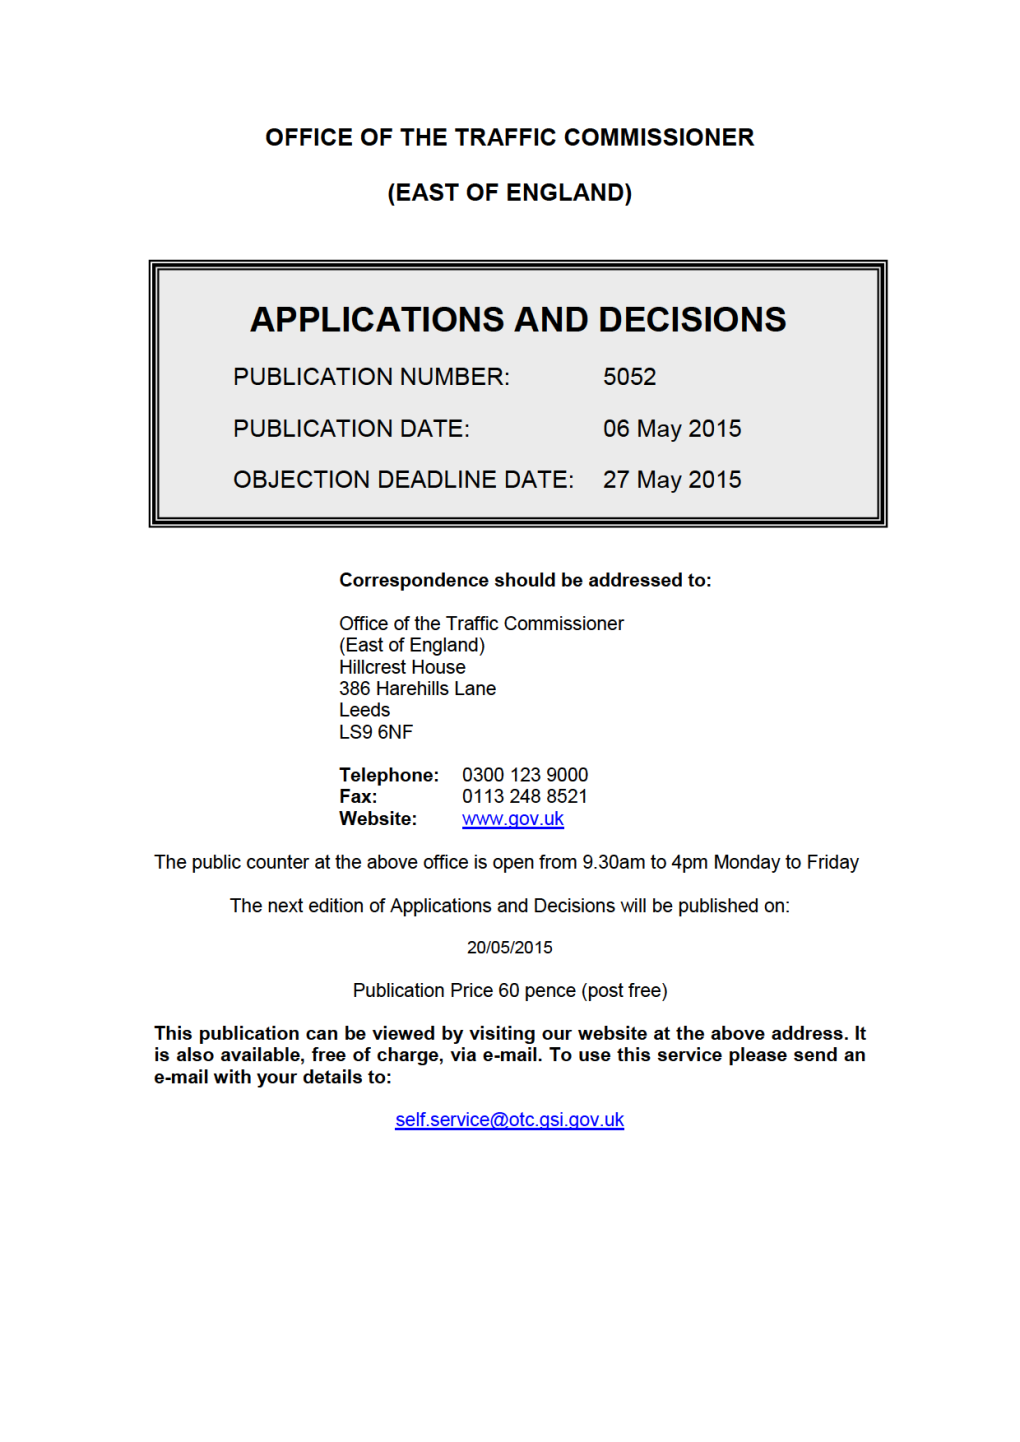 APPLICATIONS and DECISIONS 6 May 2015